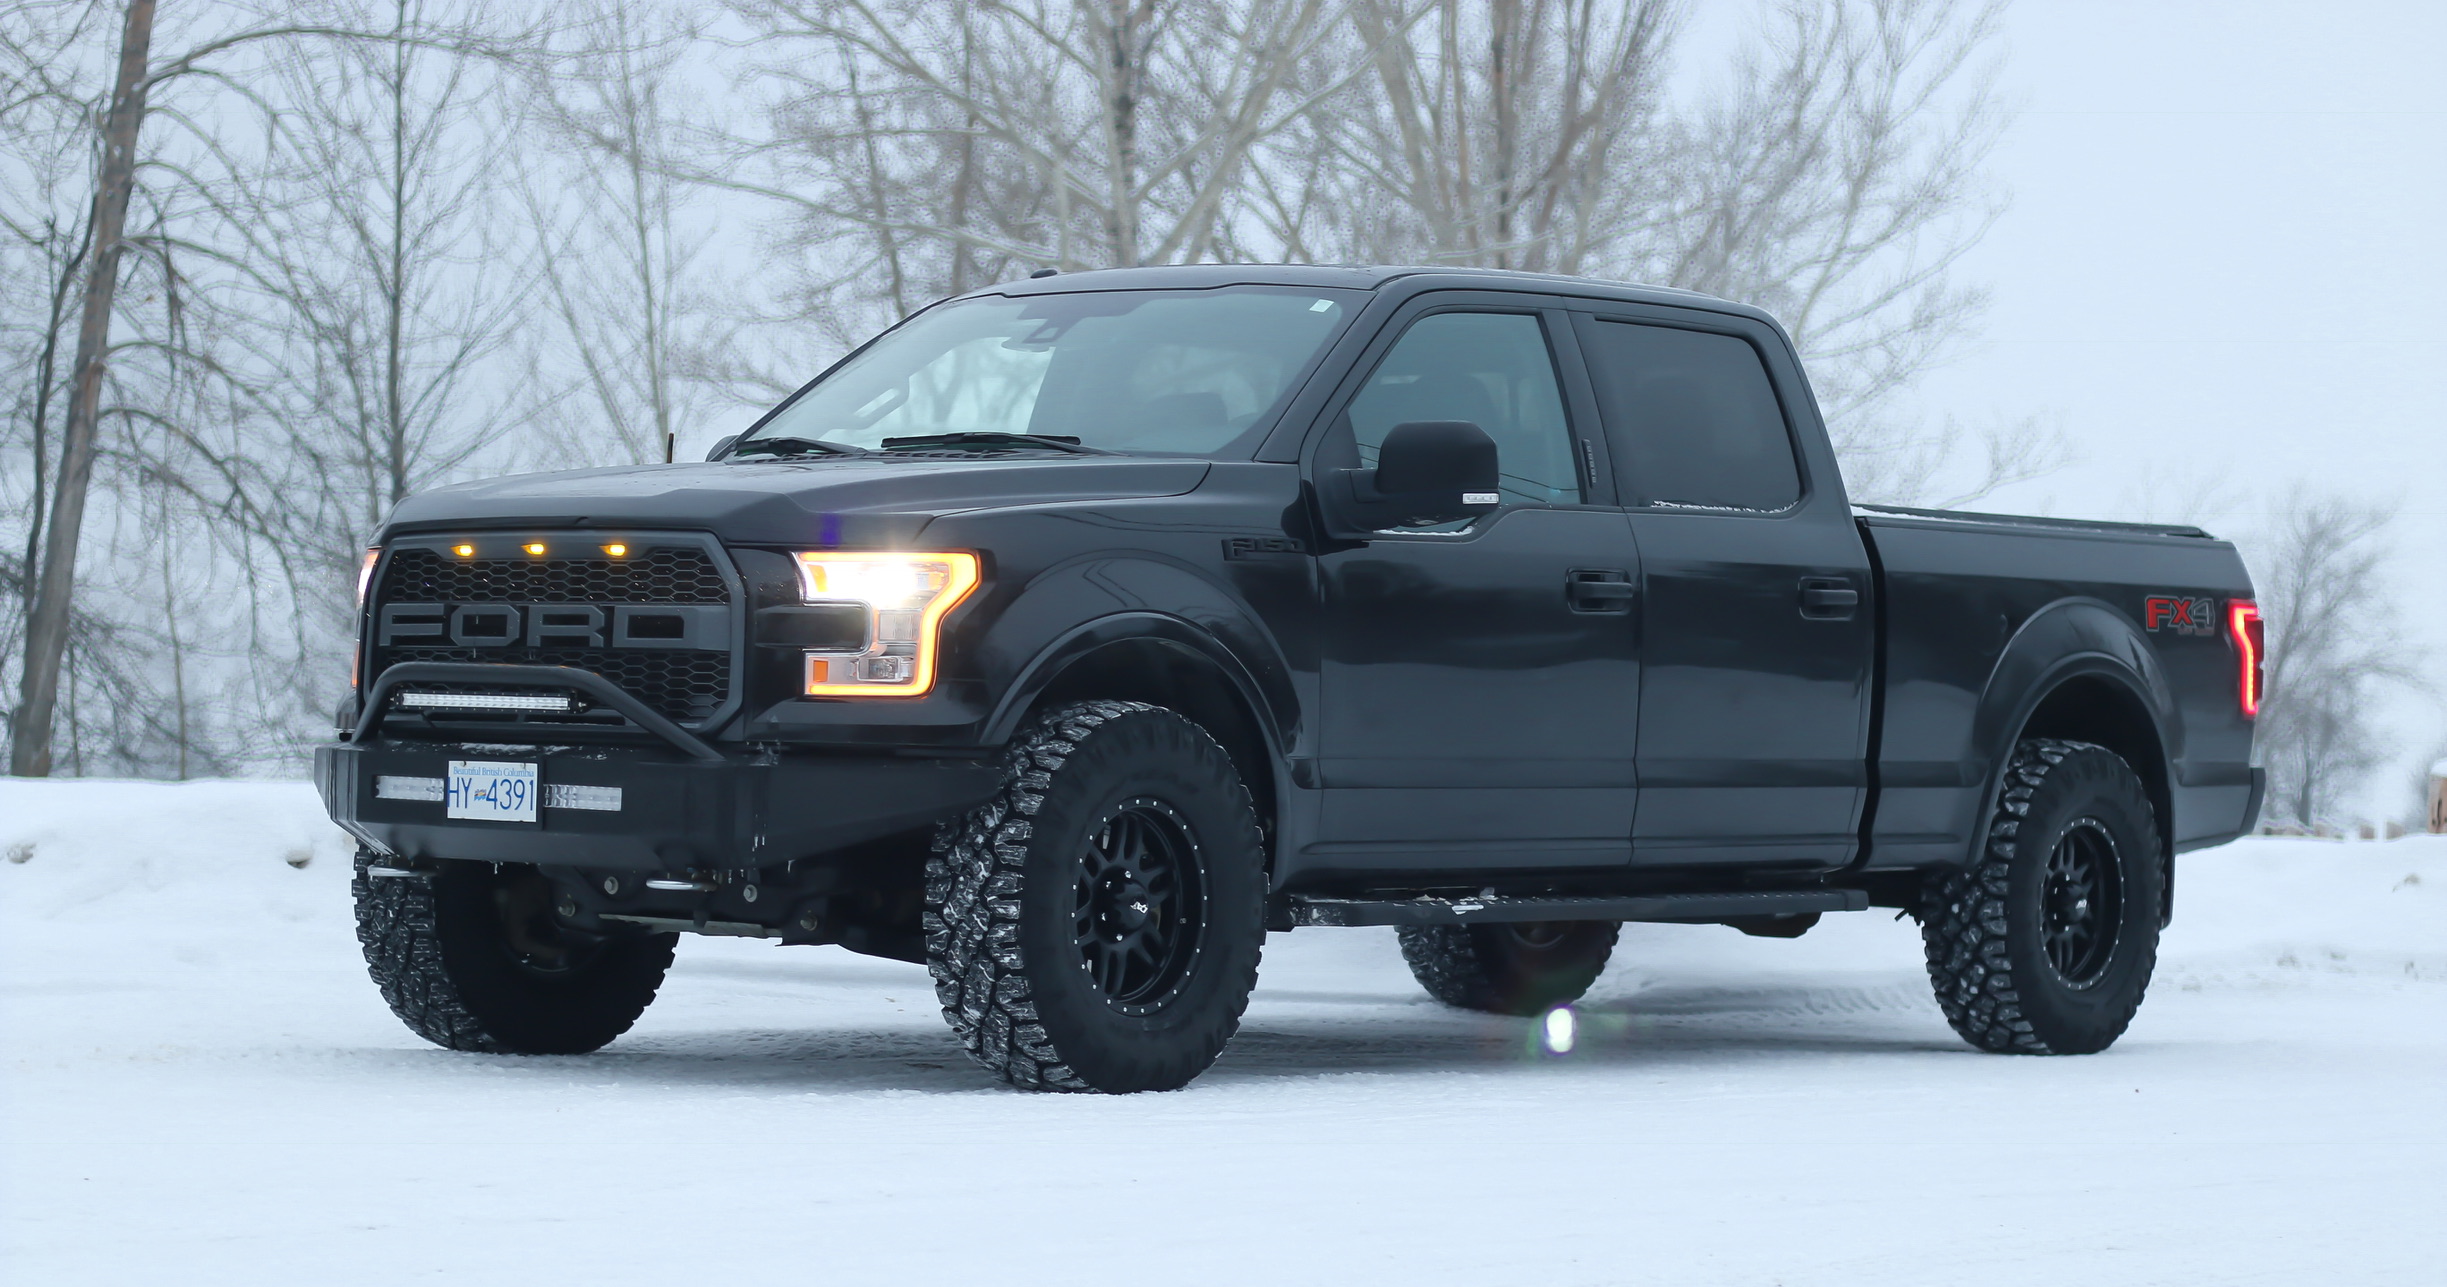 THE Black F150 Photo Thread - Page 58 - Ford F150 Forum - Community of ...